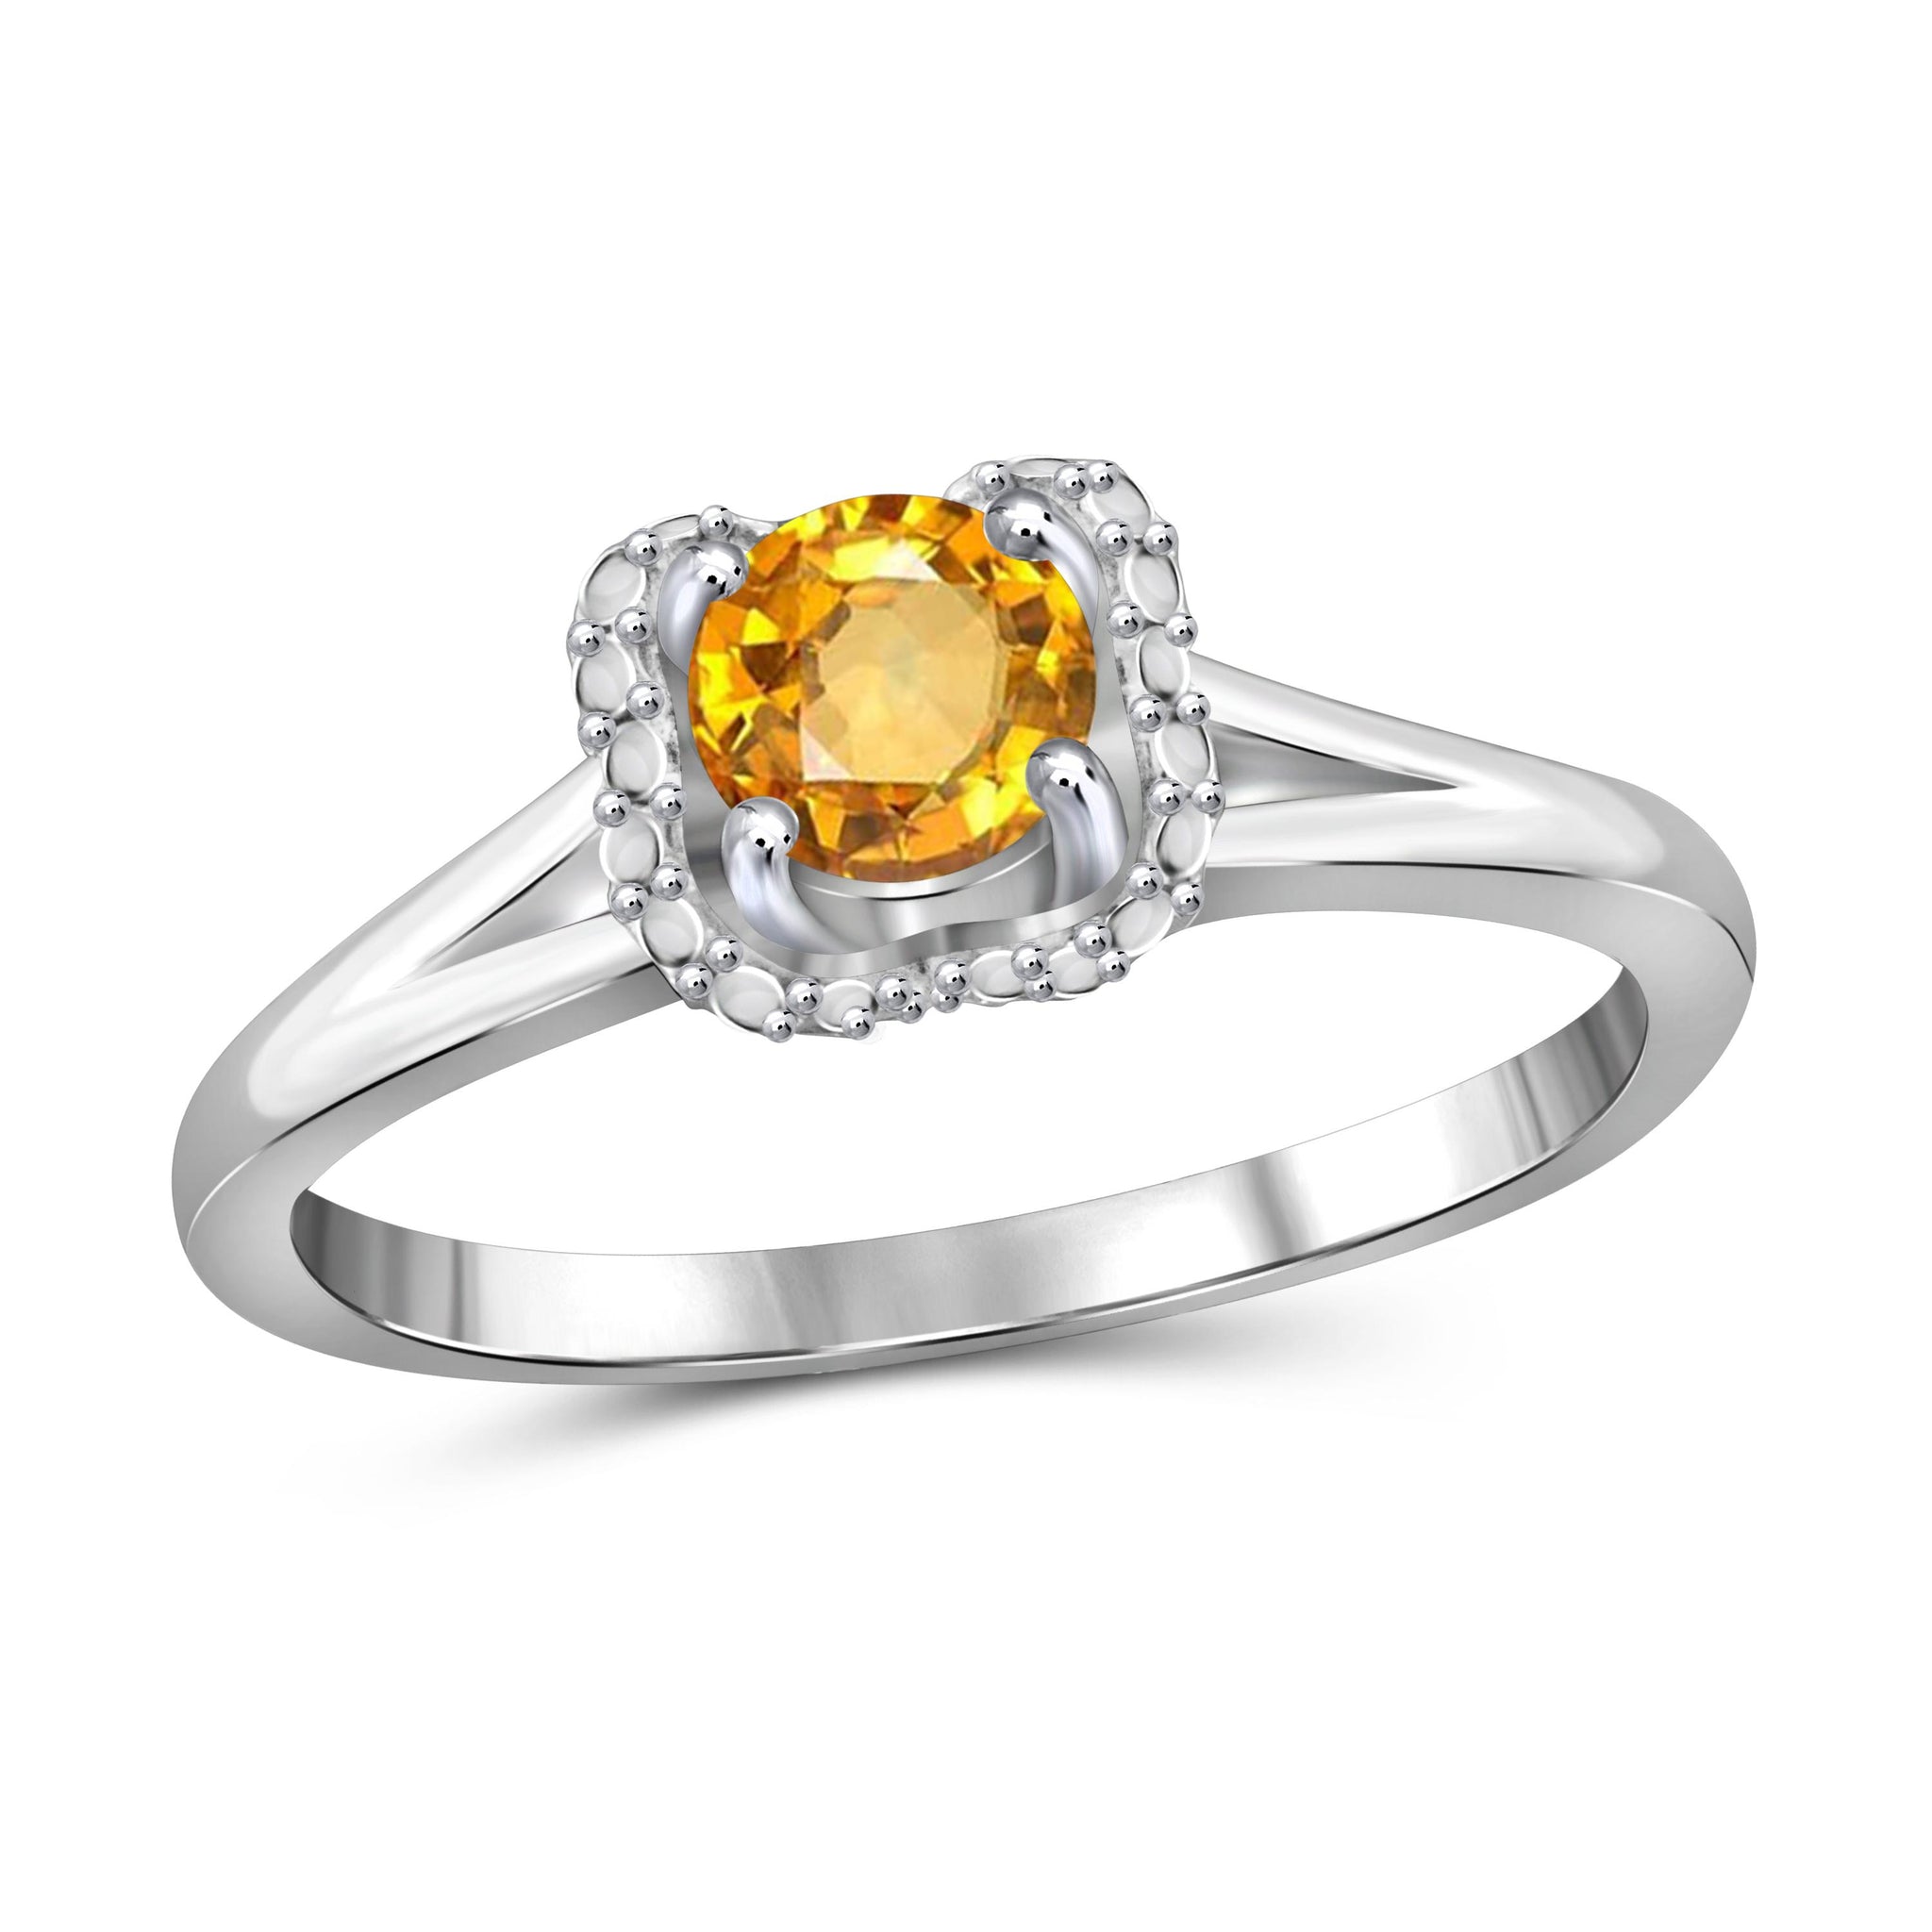 JewelonFire 1/2 Carat T.G.W. Citrine Sterling Silver Ring - Assorted Colors